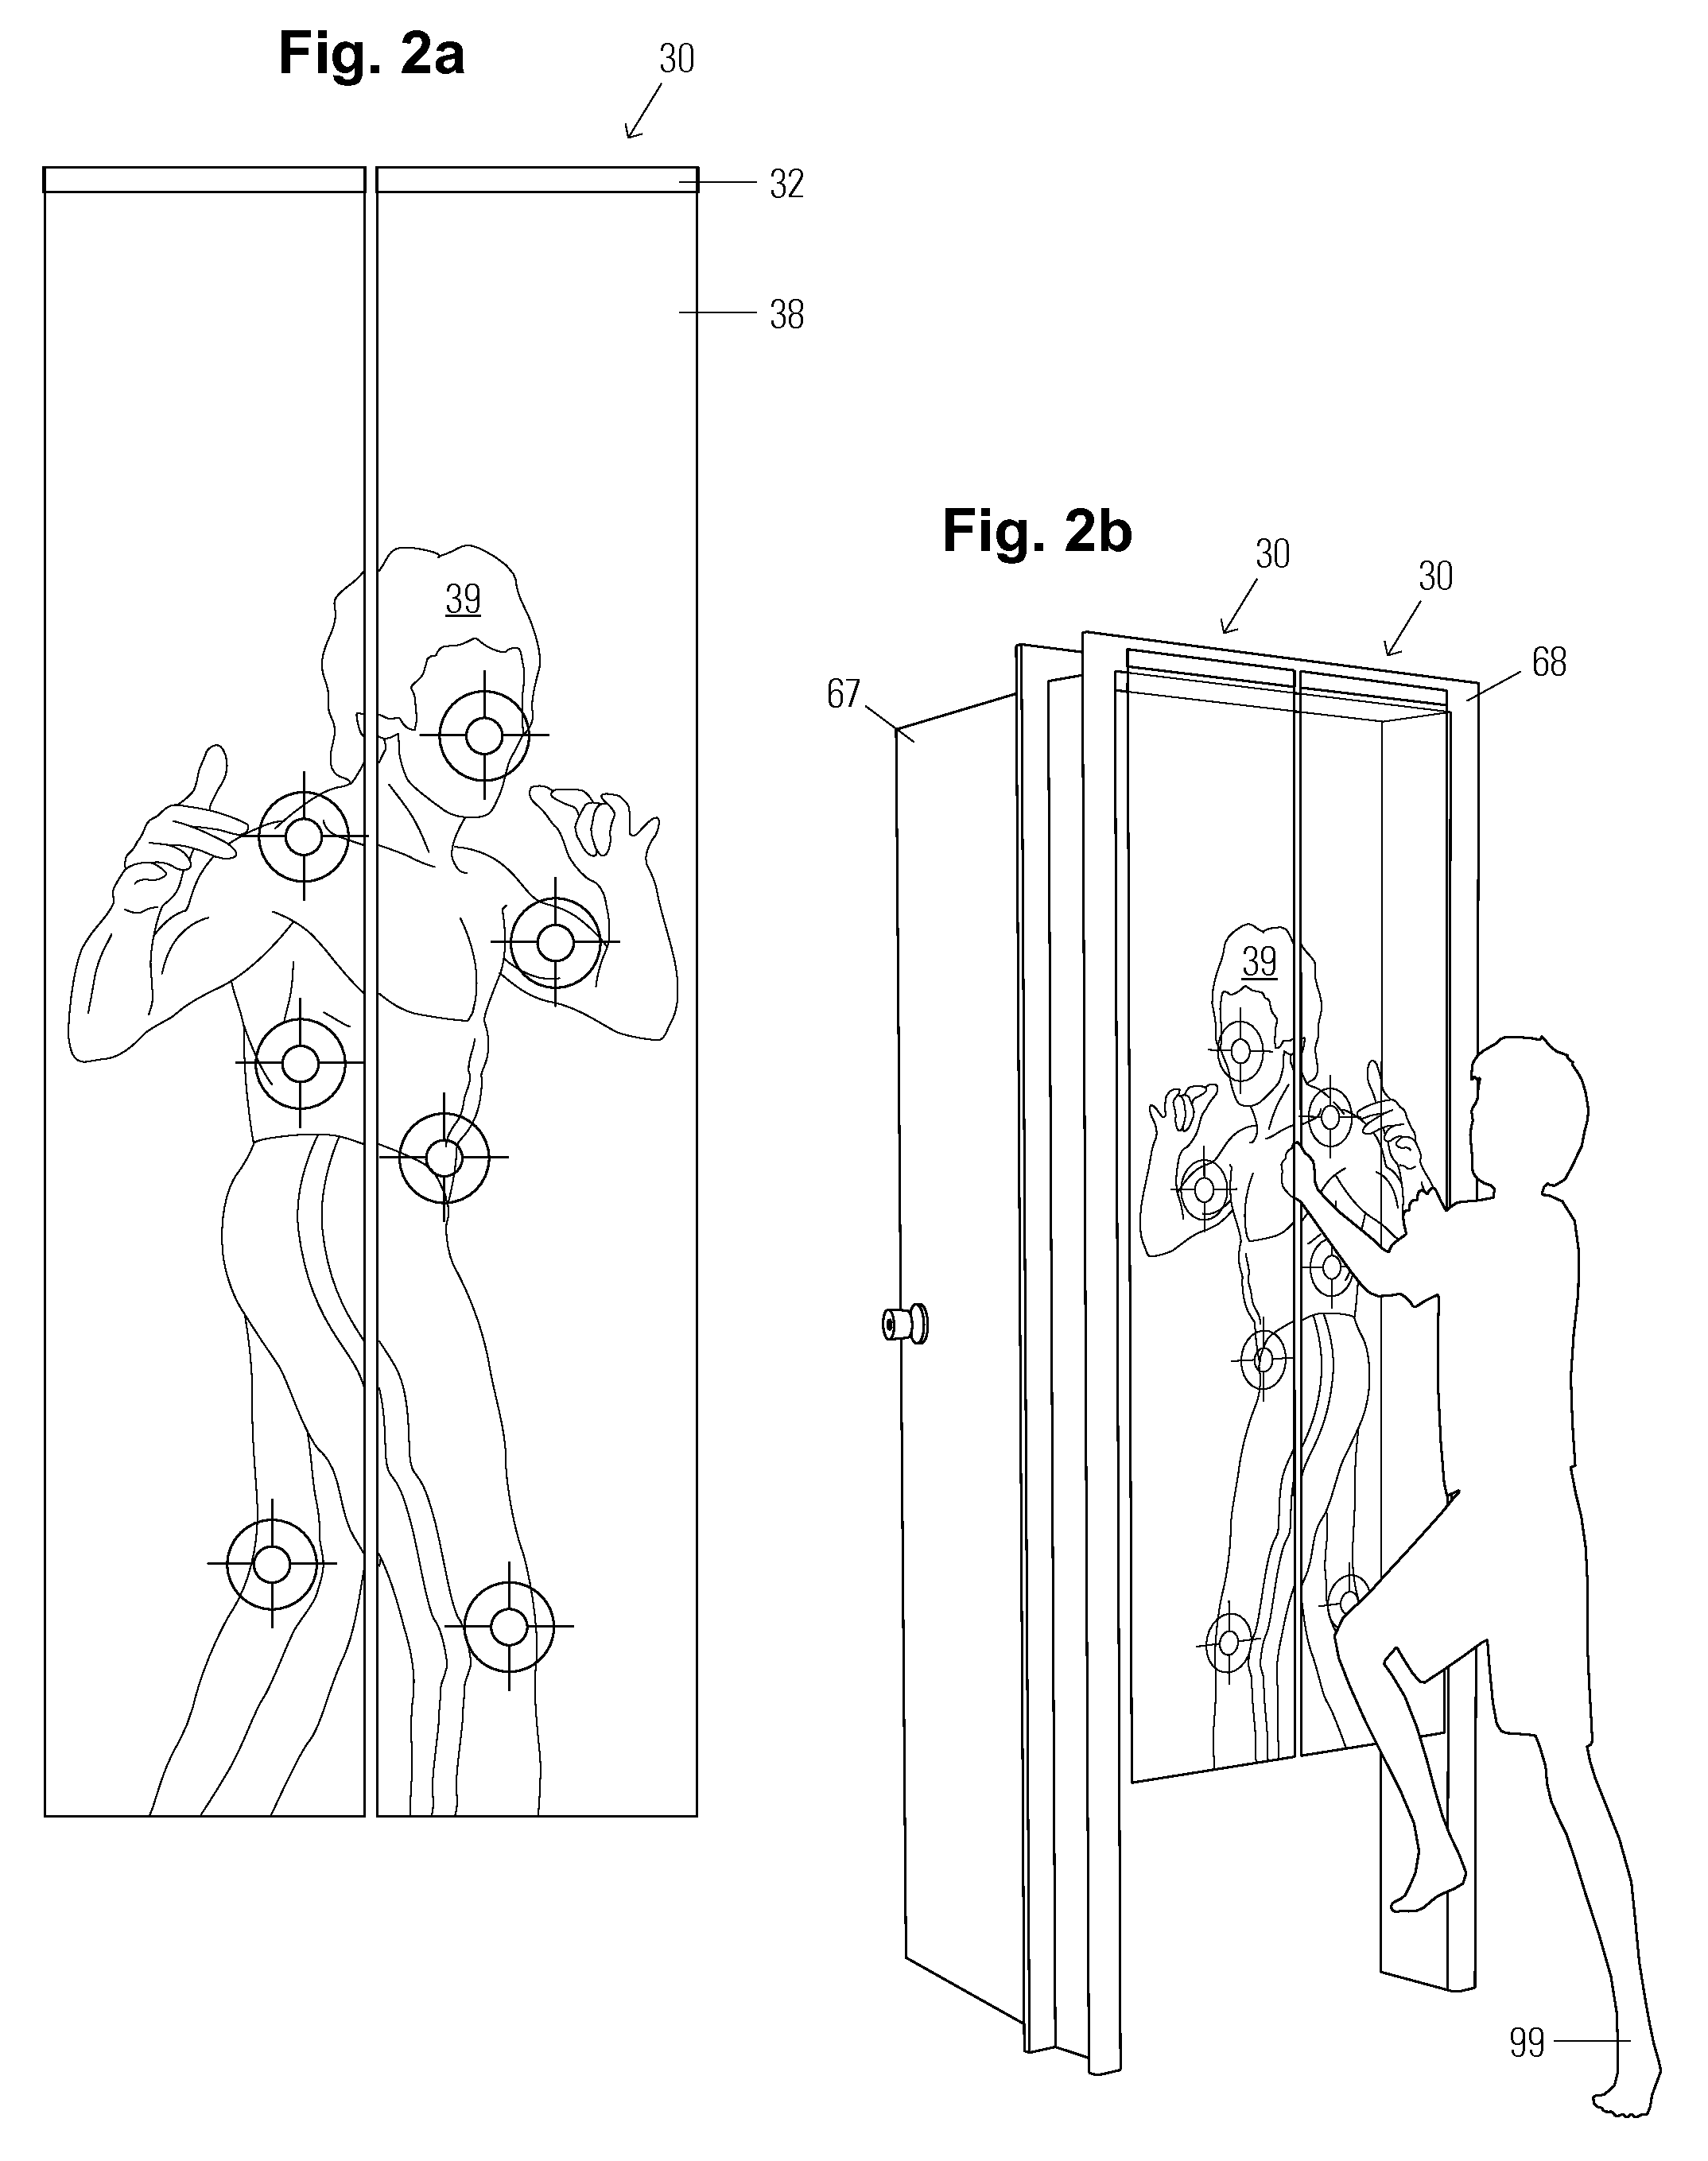 Martial arts striking device with flexible, non-force impact, relatively non-resistant contact, striking targets, and method of use